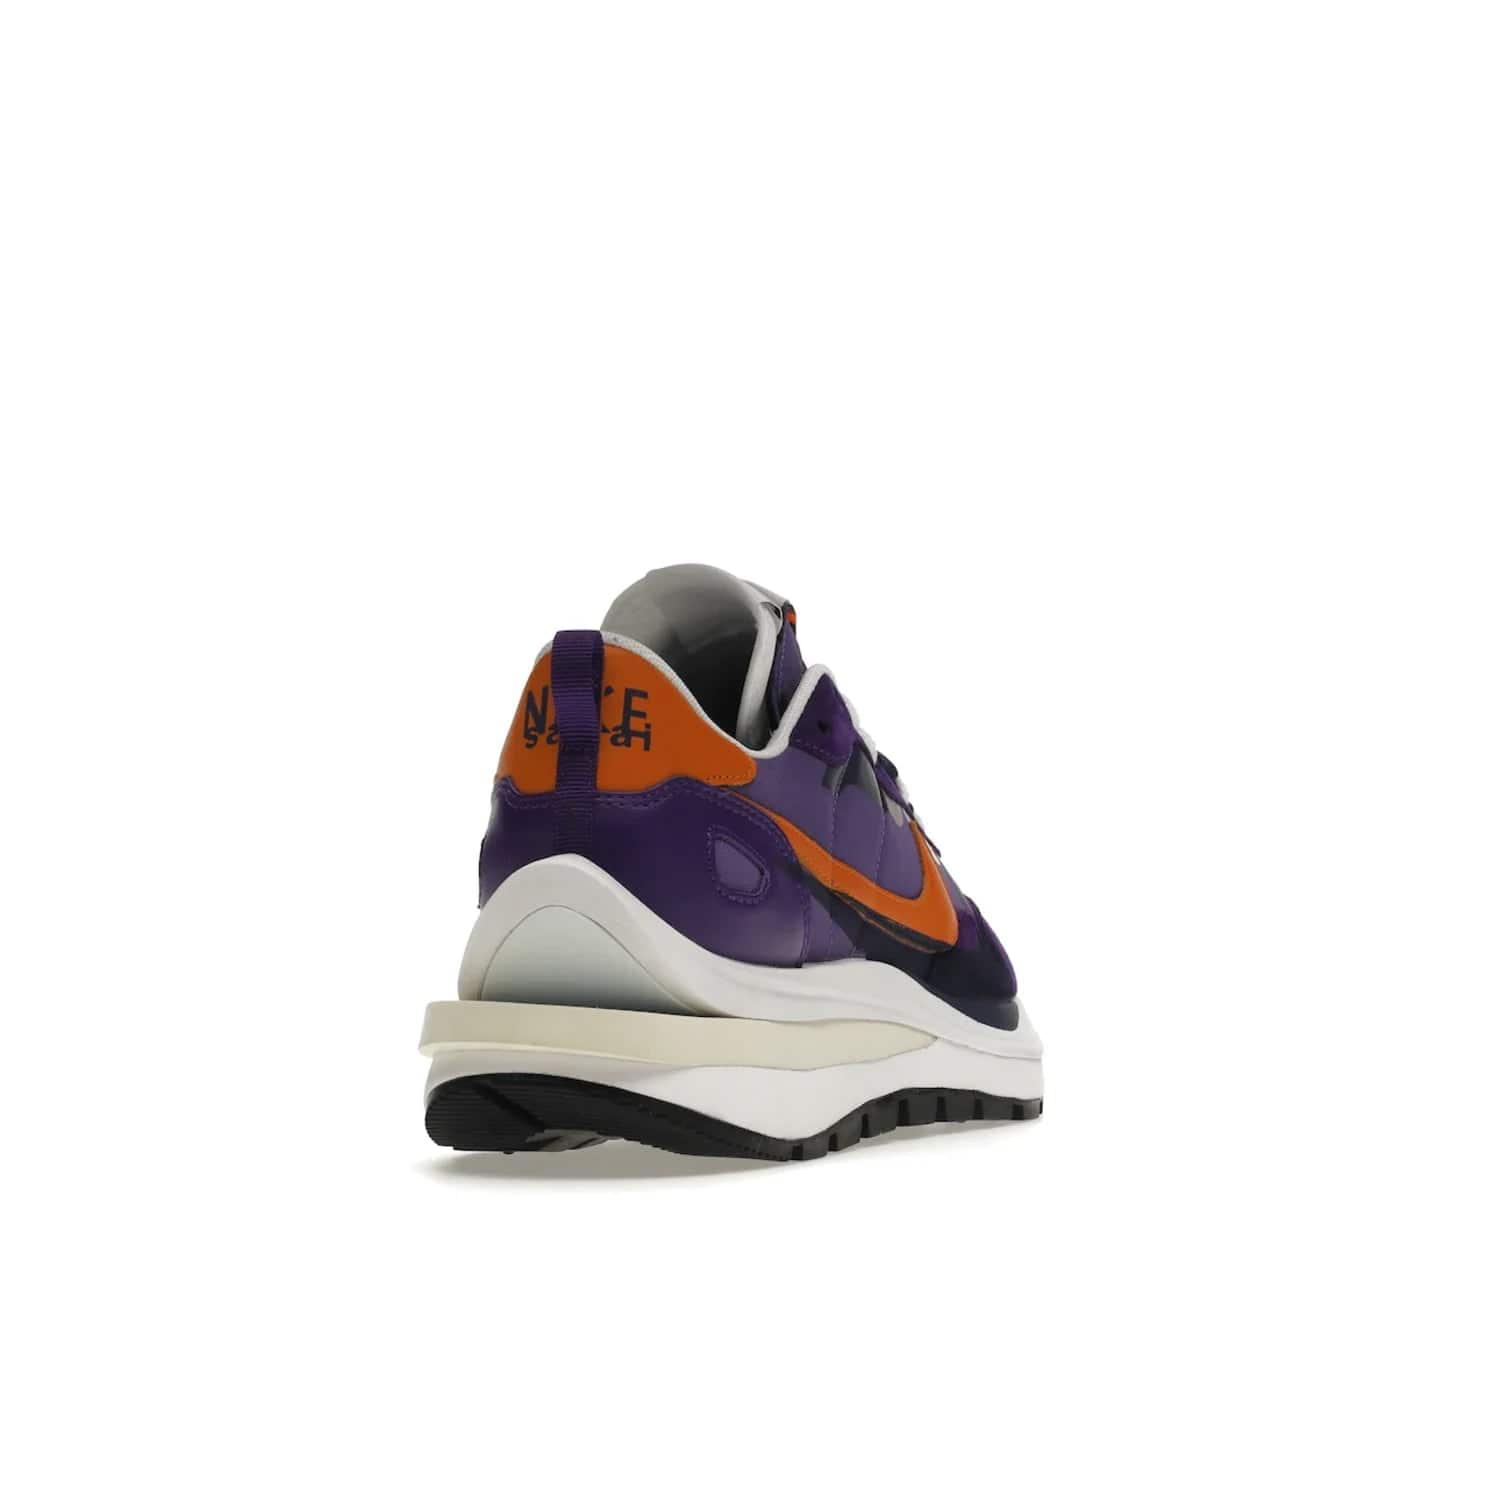 Nike Vaporwaffle sacai Dark Iris - Image 30 - Only at www.BallersClubKickz.com - Unique Nike Vaporwaffle sacai Dark Iris collab. Suede, leather & textile upper with Orange accents. Dual tongues & midsoles. Woven labels & heel tabs branding. Colorway of Purple, Orange, White & Black. Must-have for any wardrobe.